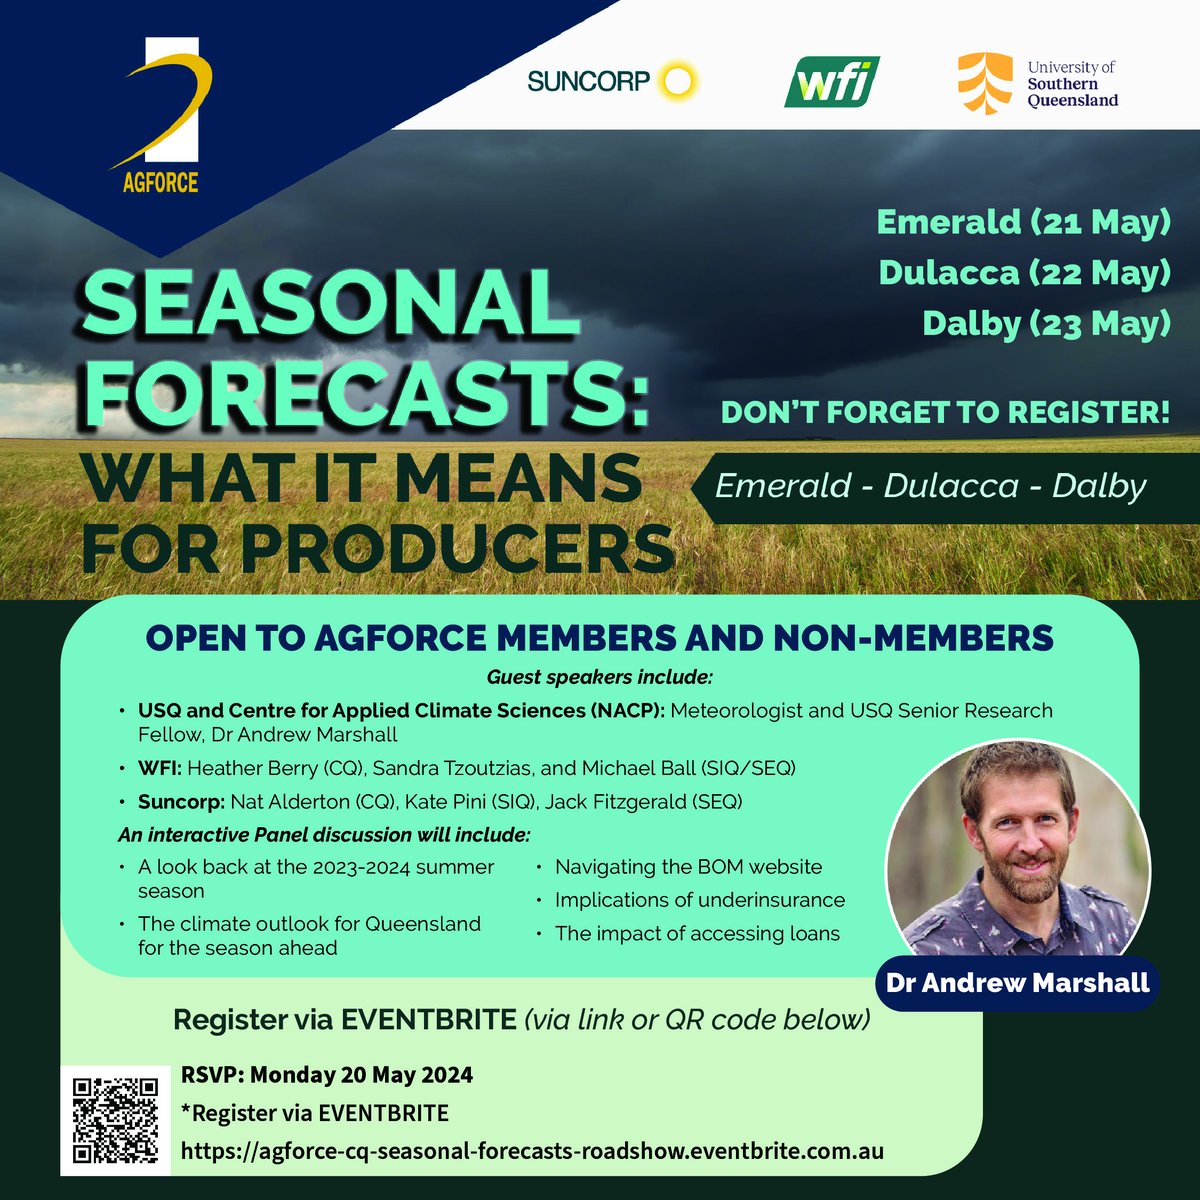 In central, southern inland or south east Qld? Register now for our seminars about seasonal forecasts and what they mean for producers. 📅 Where and when: Emerald (21 May); Dulacca (22 May); Dalby 23 May Register at: okt.to/KbPkam   #everyfamilyneedsafarmer